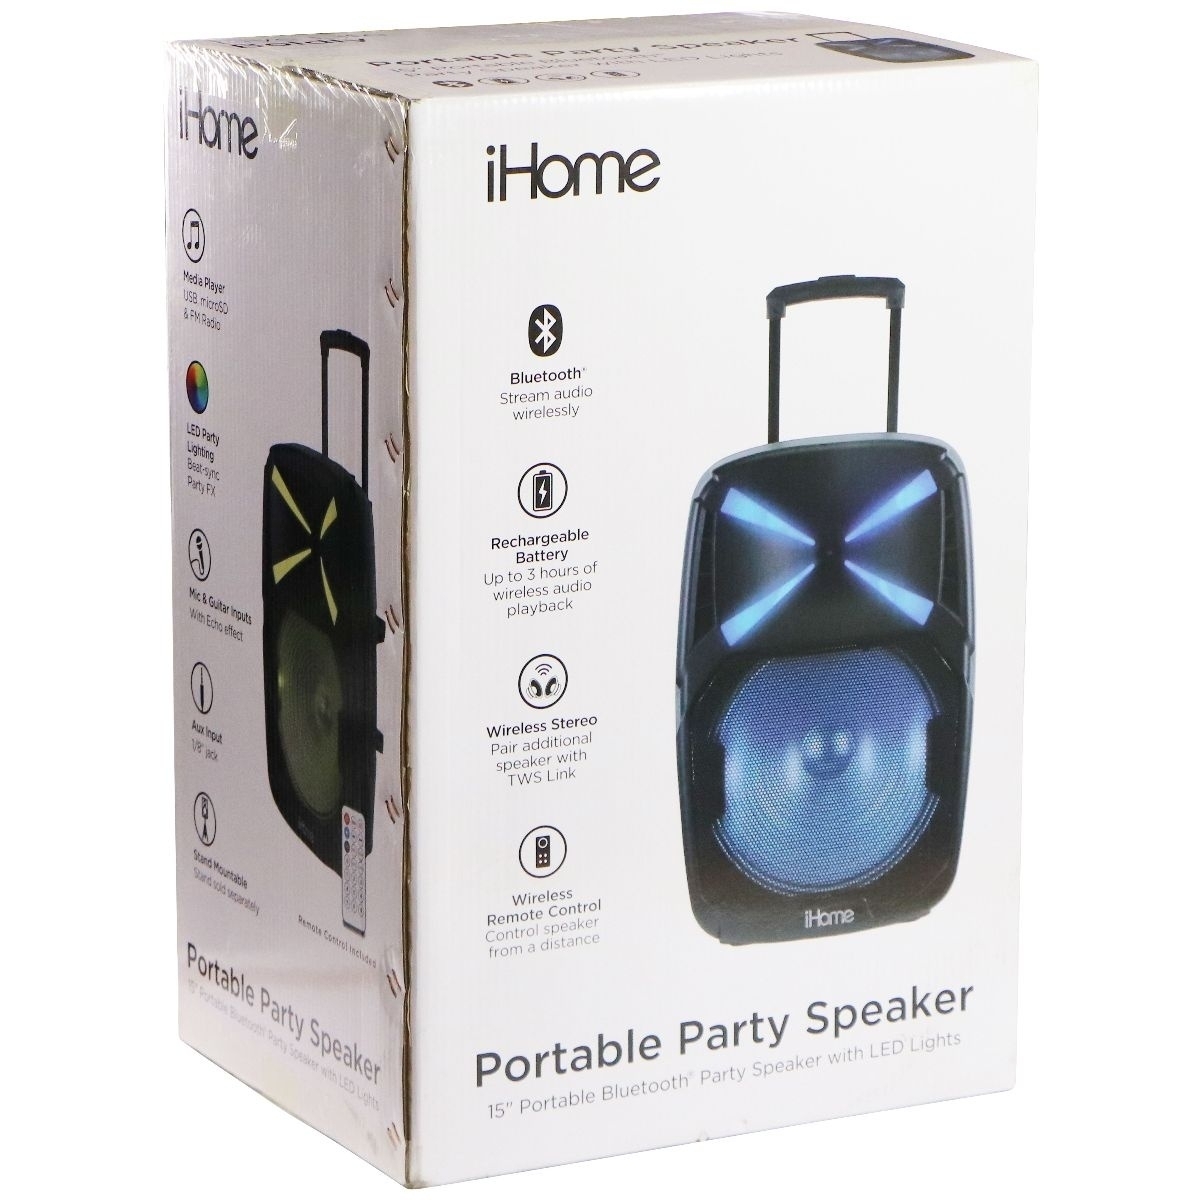 IHome 200W Portable Bluetooth Karaoke Party Speaker With Lights & 15-inch Woofer